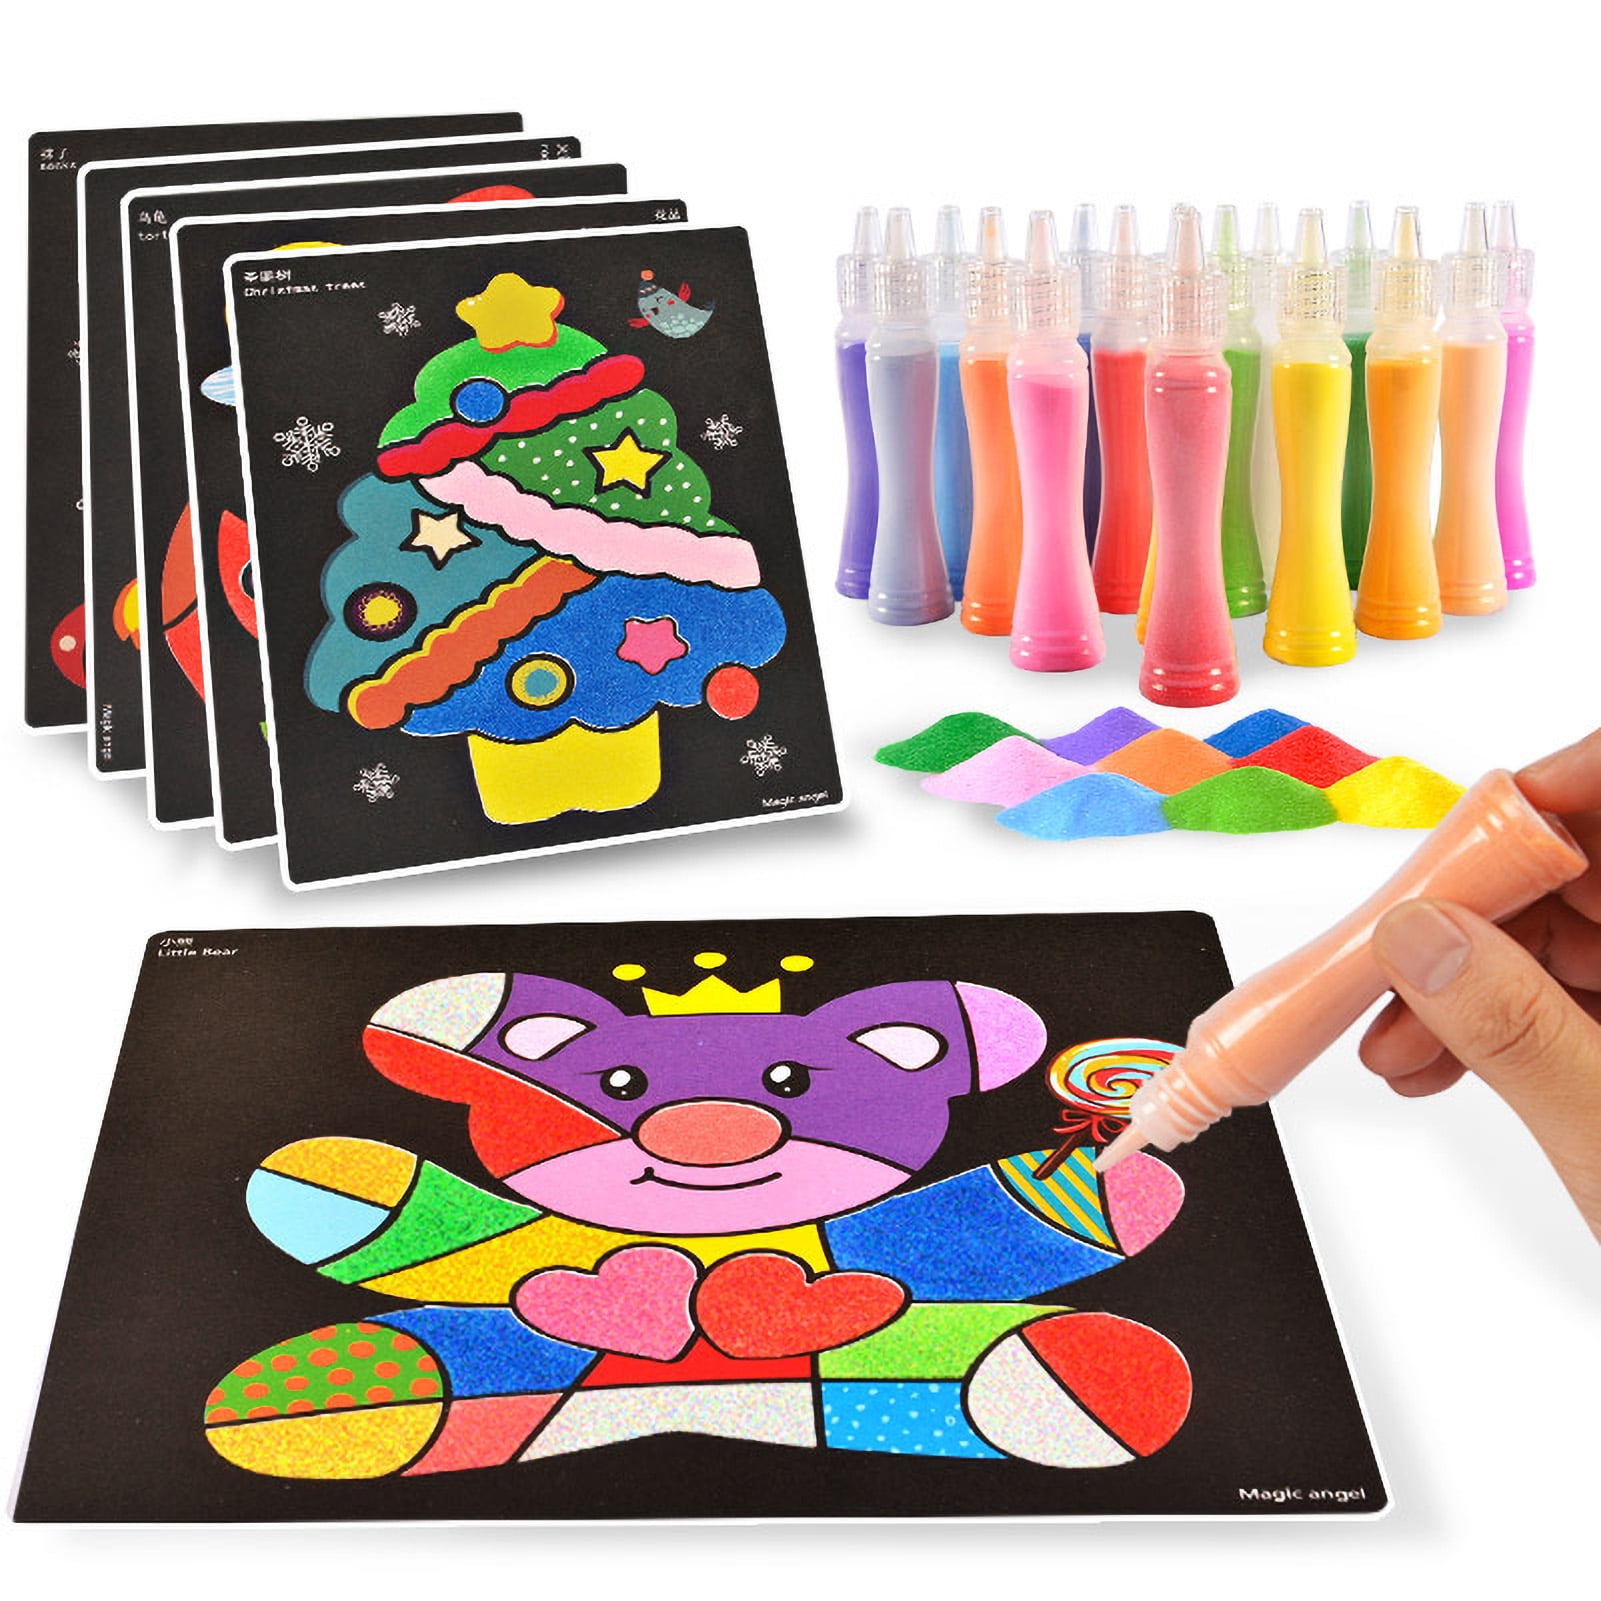 Berry President Sand Painting Cards Art Kids Coloring DIY Paper Craft Kit with 12 Bottles Colored Sand for 4 5 6 7 Year Old Children Kids (12